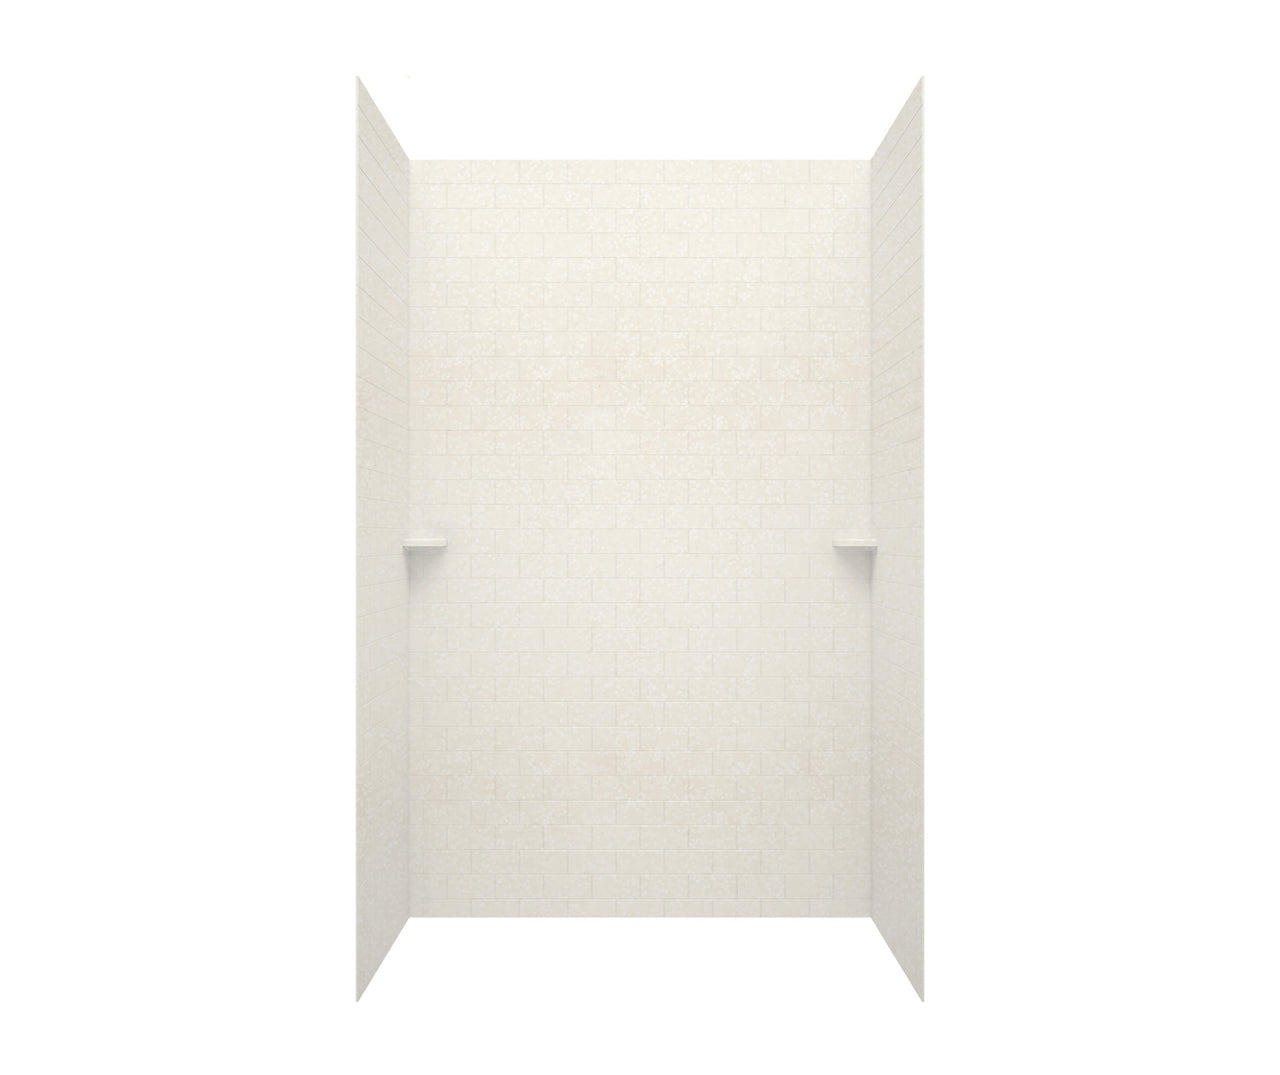 36-In x 62-In x 96-In Swanstone 3x6 Subway Tile Shower Wall Kit - BNGBath